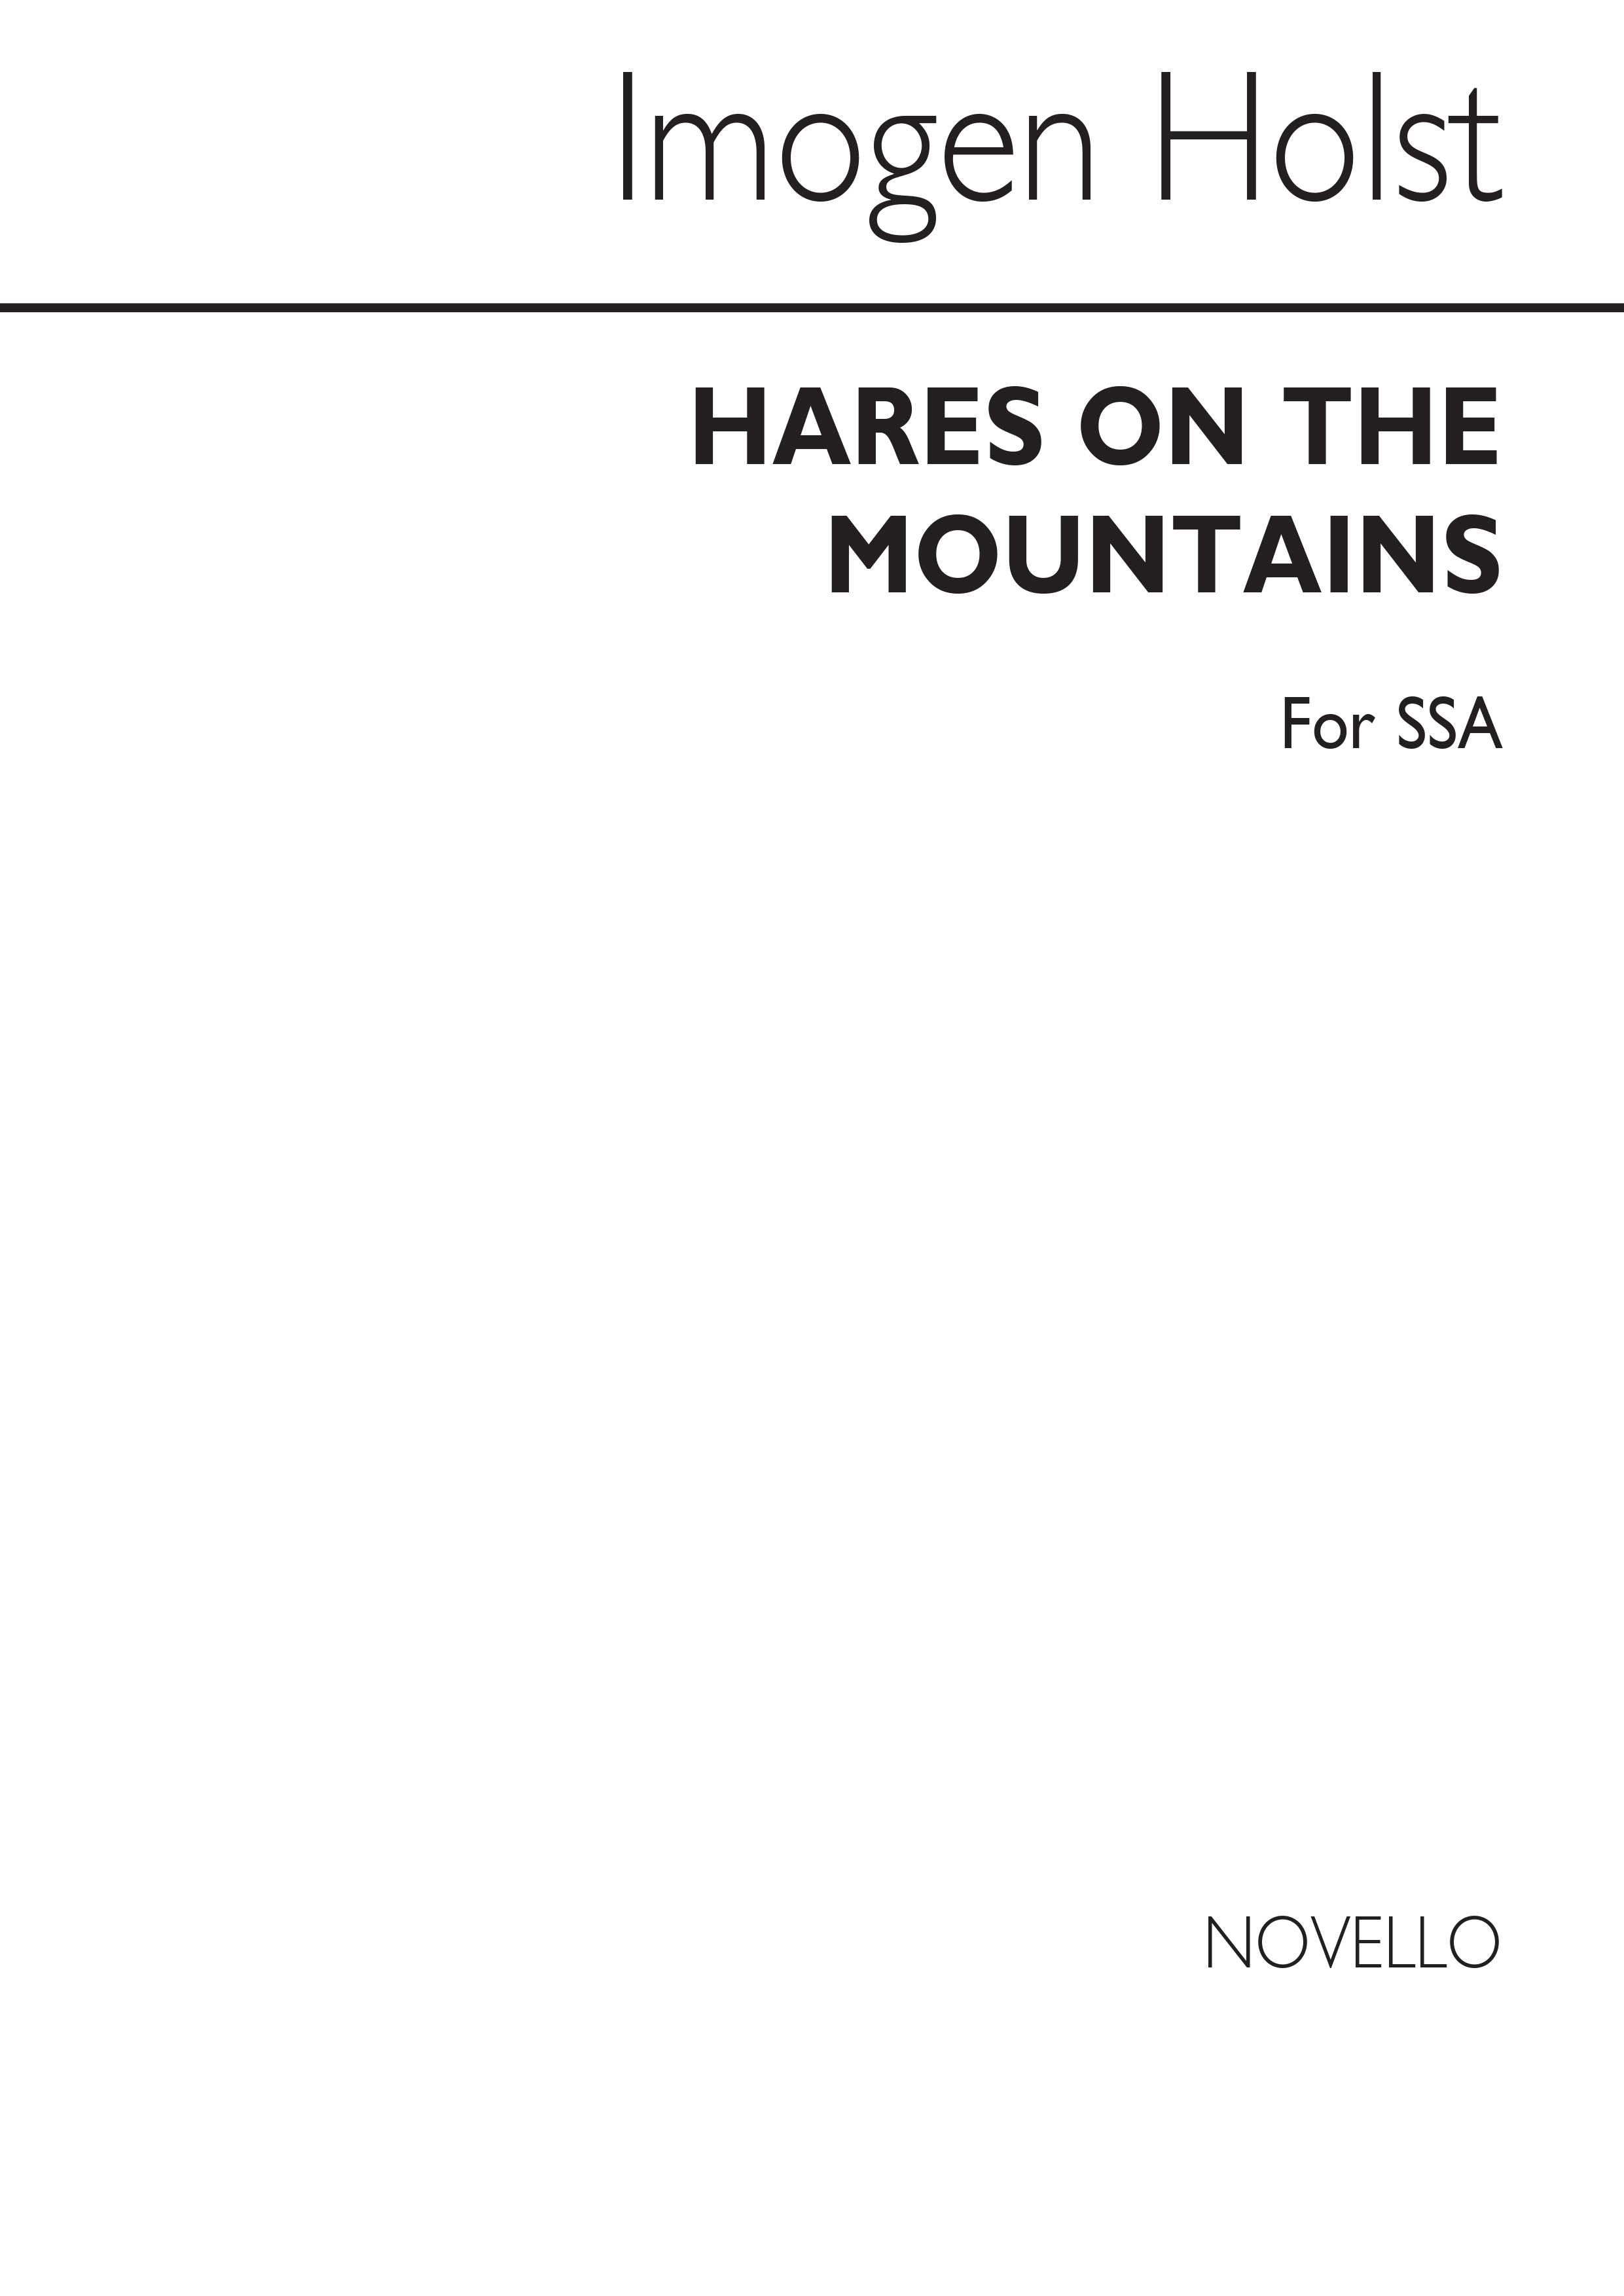 Imogen Holst: Hares On The Mountains for SSA